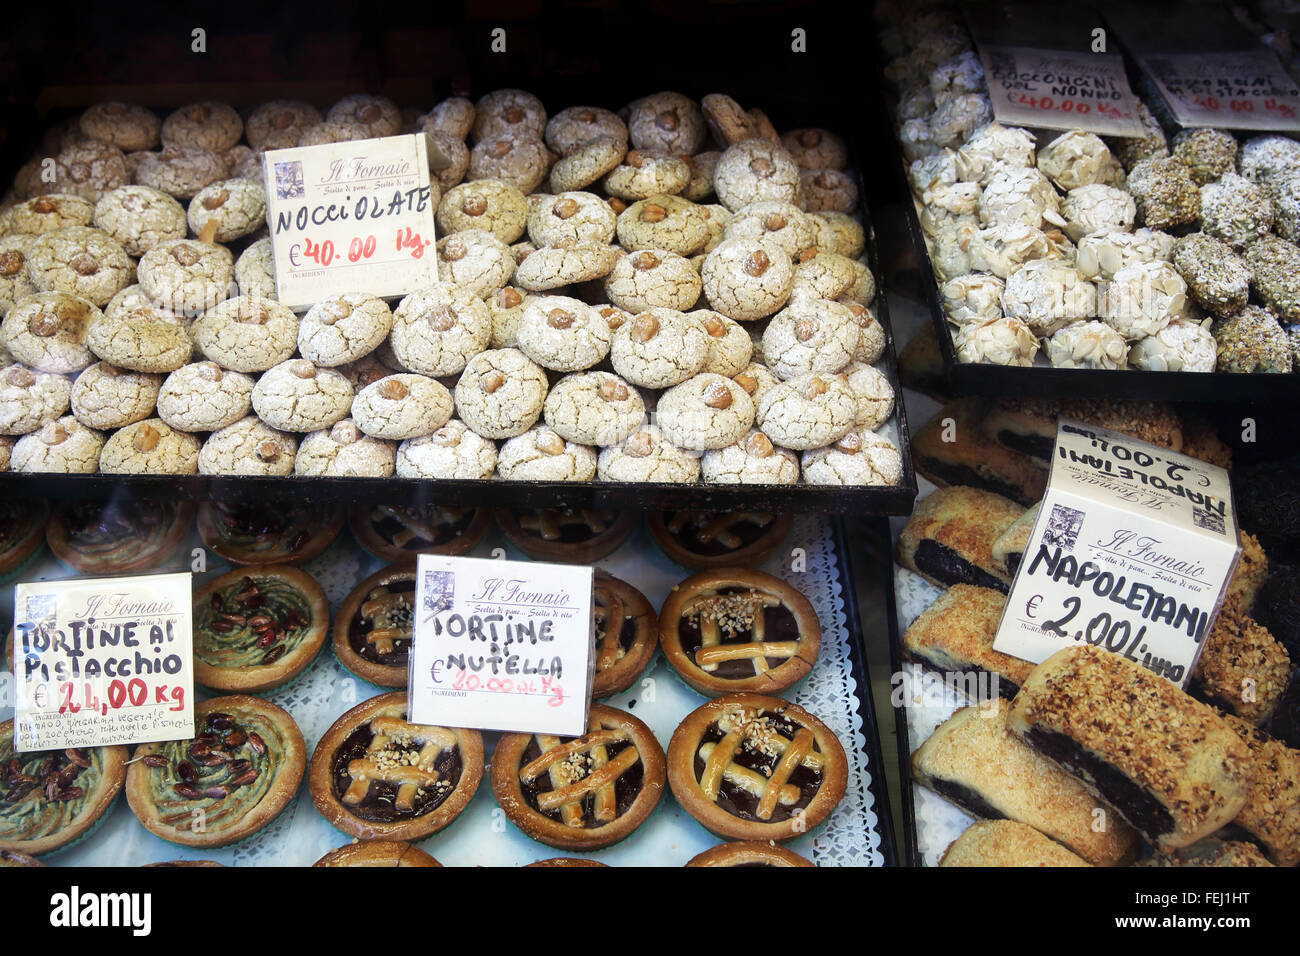 Biscuits, tarts and other pastries displayed in Rome Stock Photo